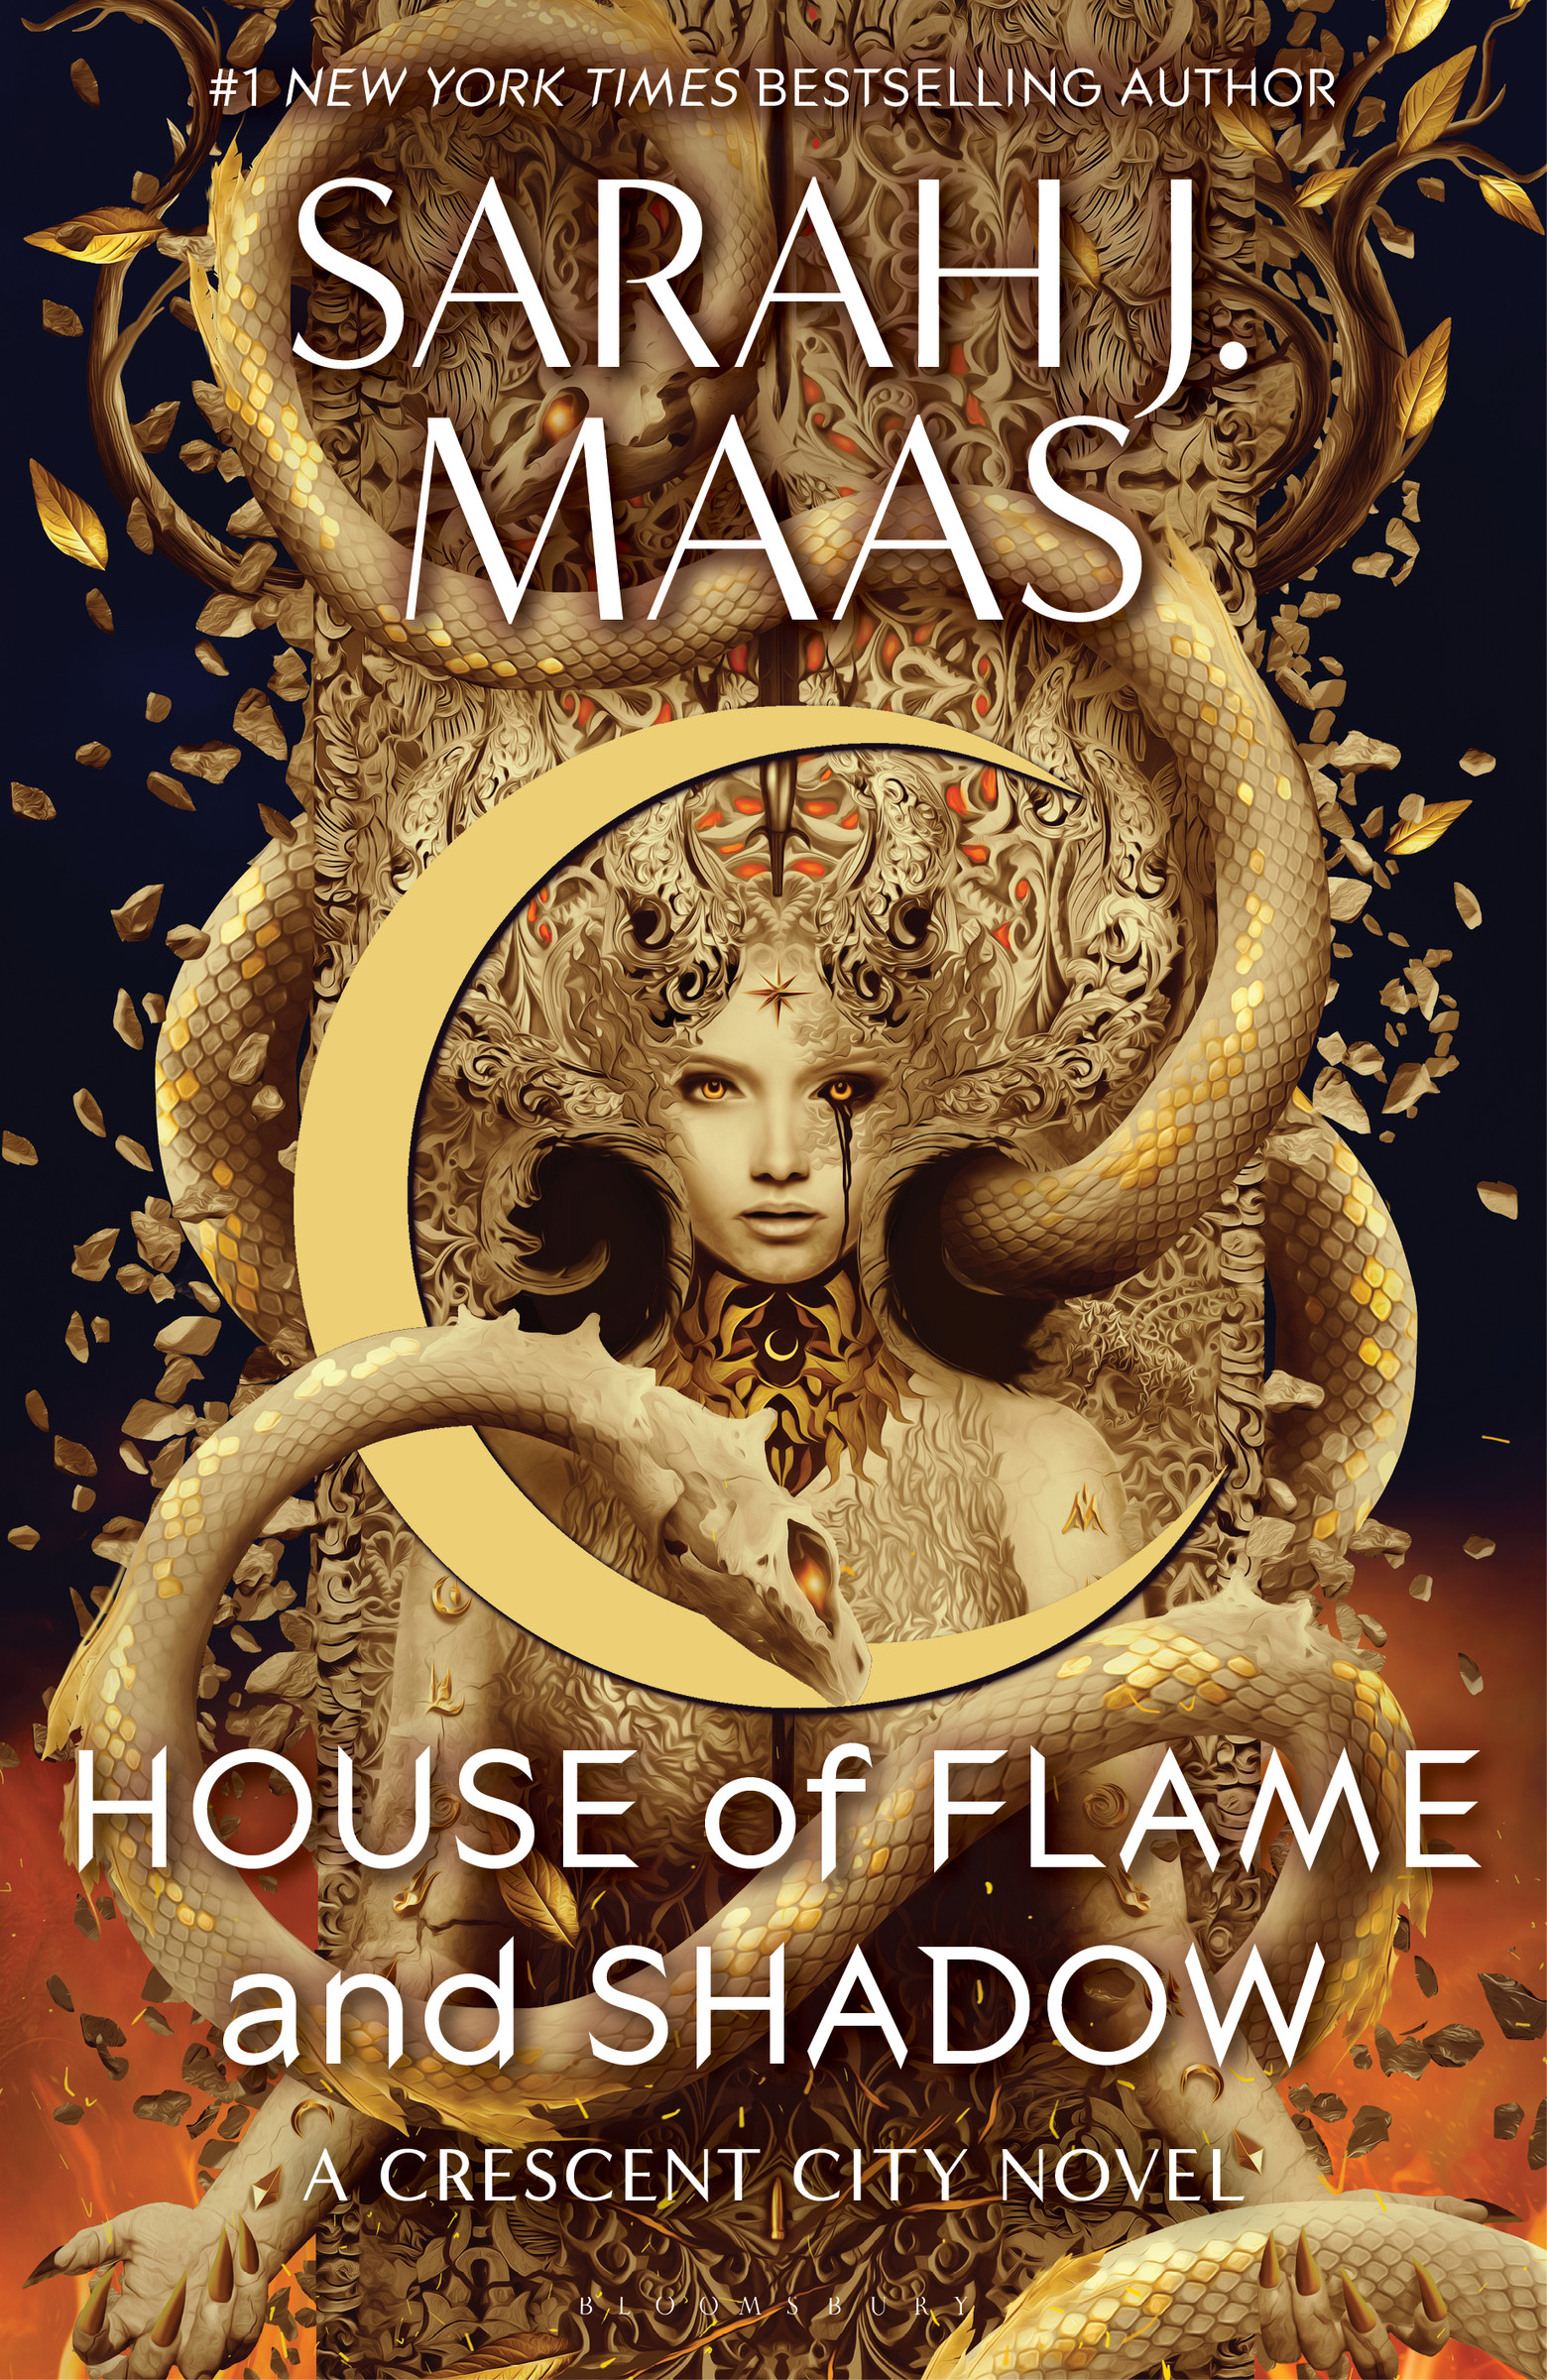 Crescent City Vol.03 - House of Flame and Shadow | Maas, Sarah J.